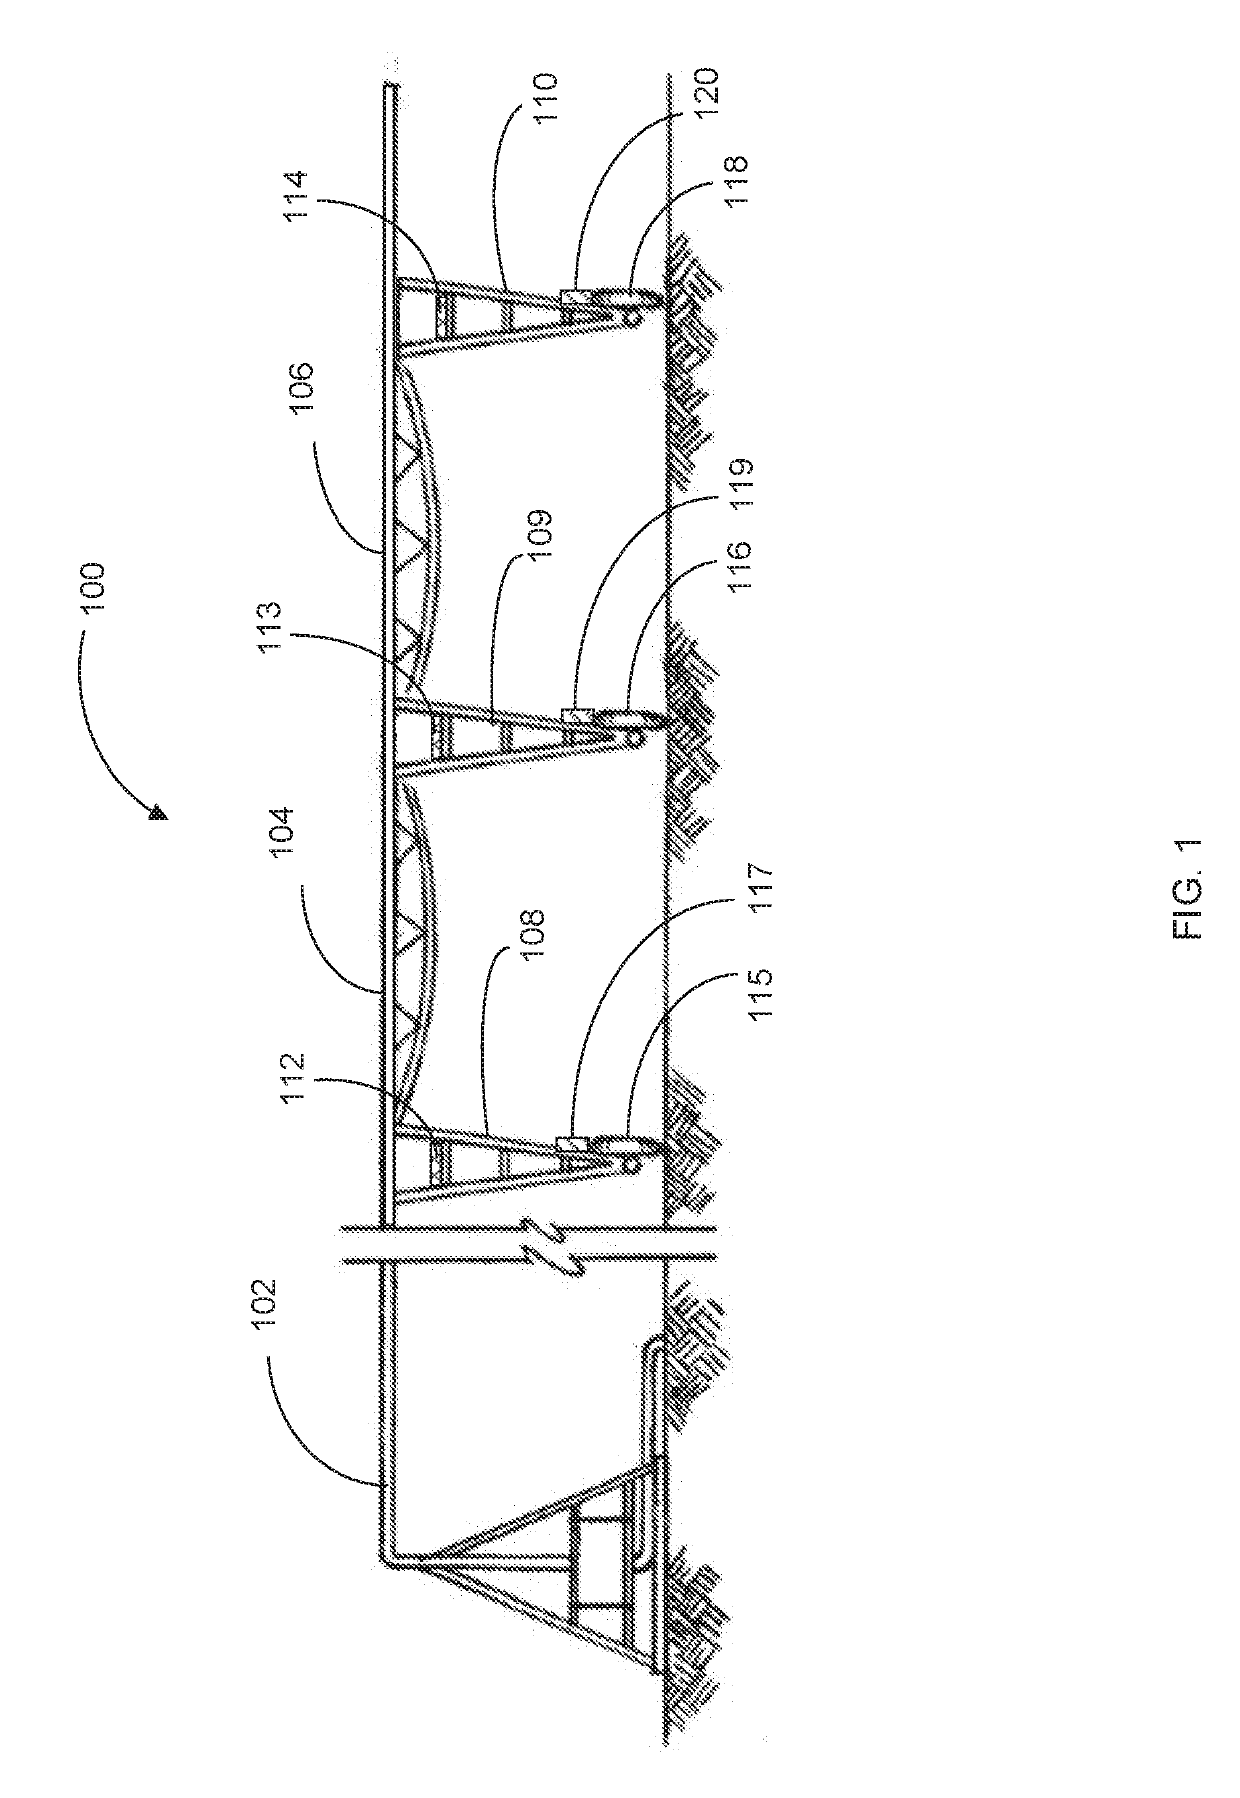 Remotely mounted gearbox breather for an irrigation machine